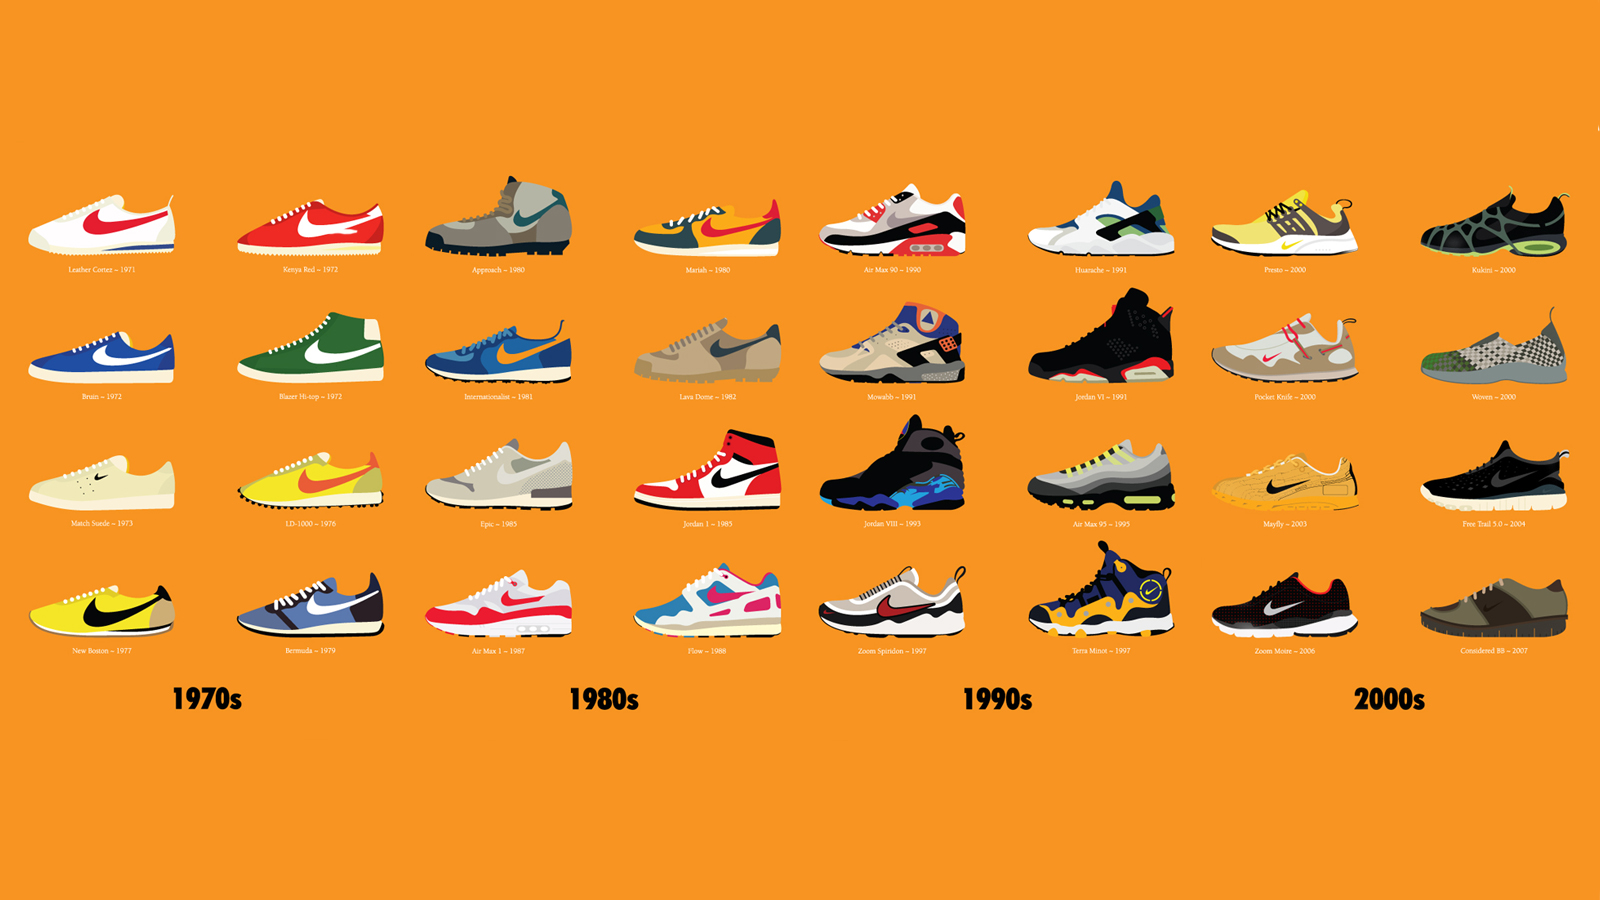 Years Of Nike's Most Iconic Shoe Designs, Visualised